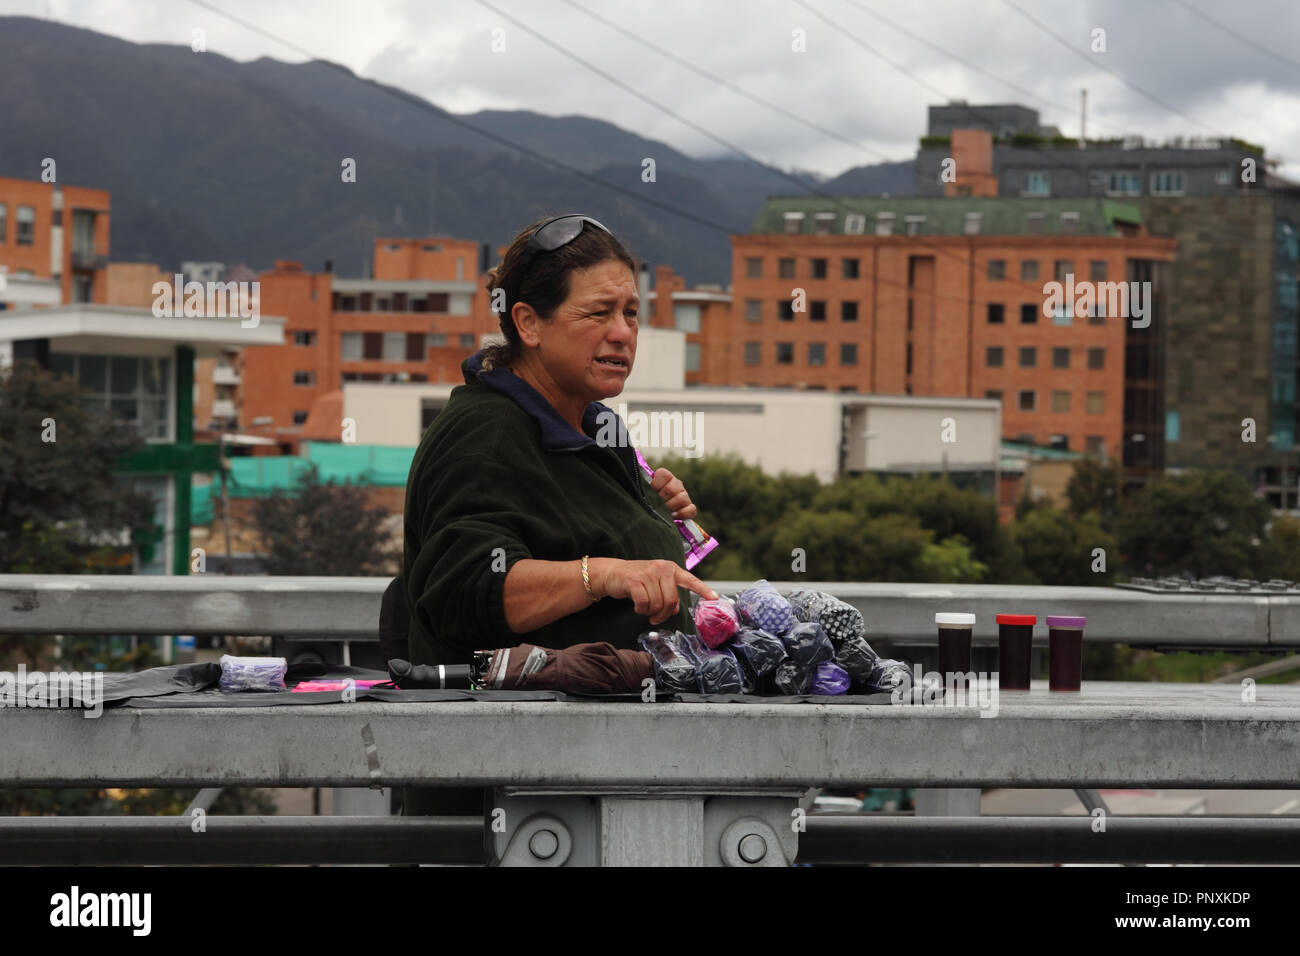 Bogota, Colombia - May 17, 2017: A commuter who uses the TransMilenio Bus Rapid Transit system on Calle 127, is seen ask for the price of umbrellas. Stock Photo